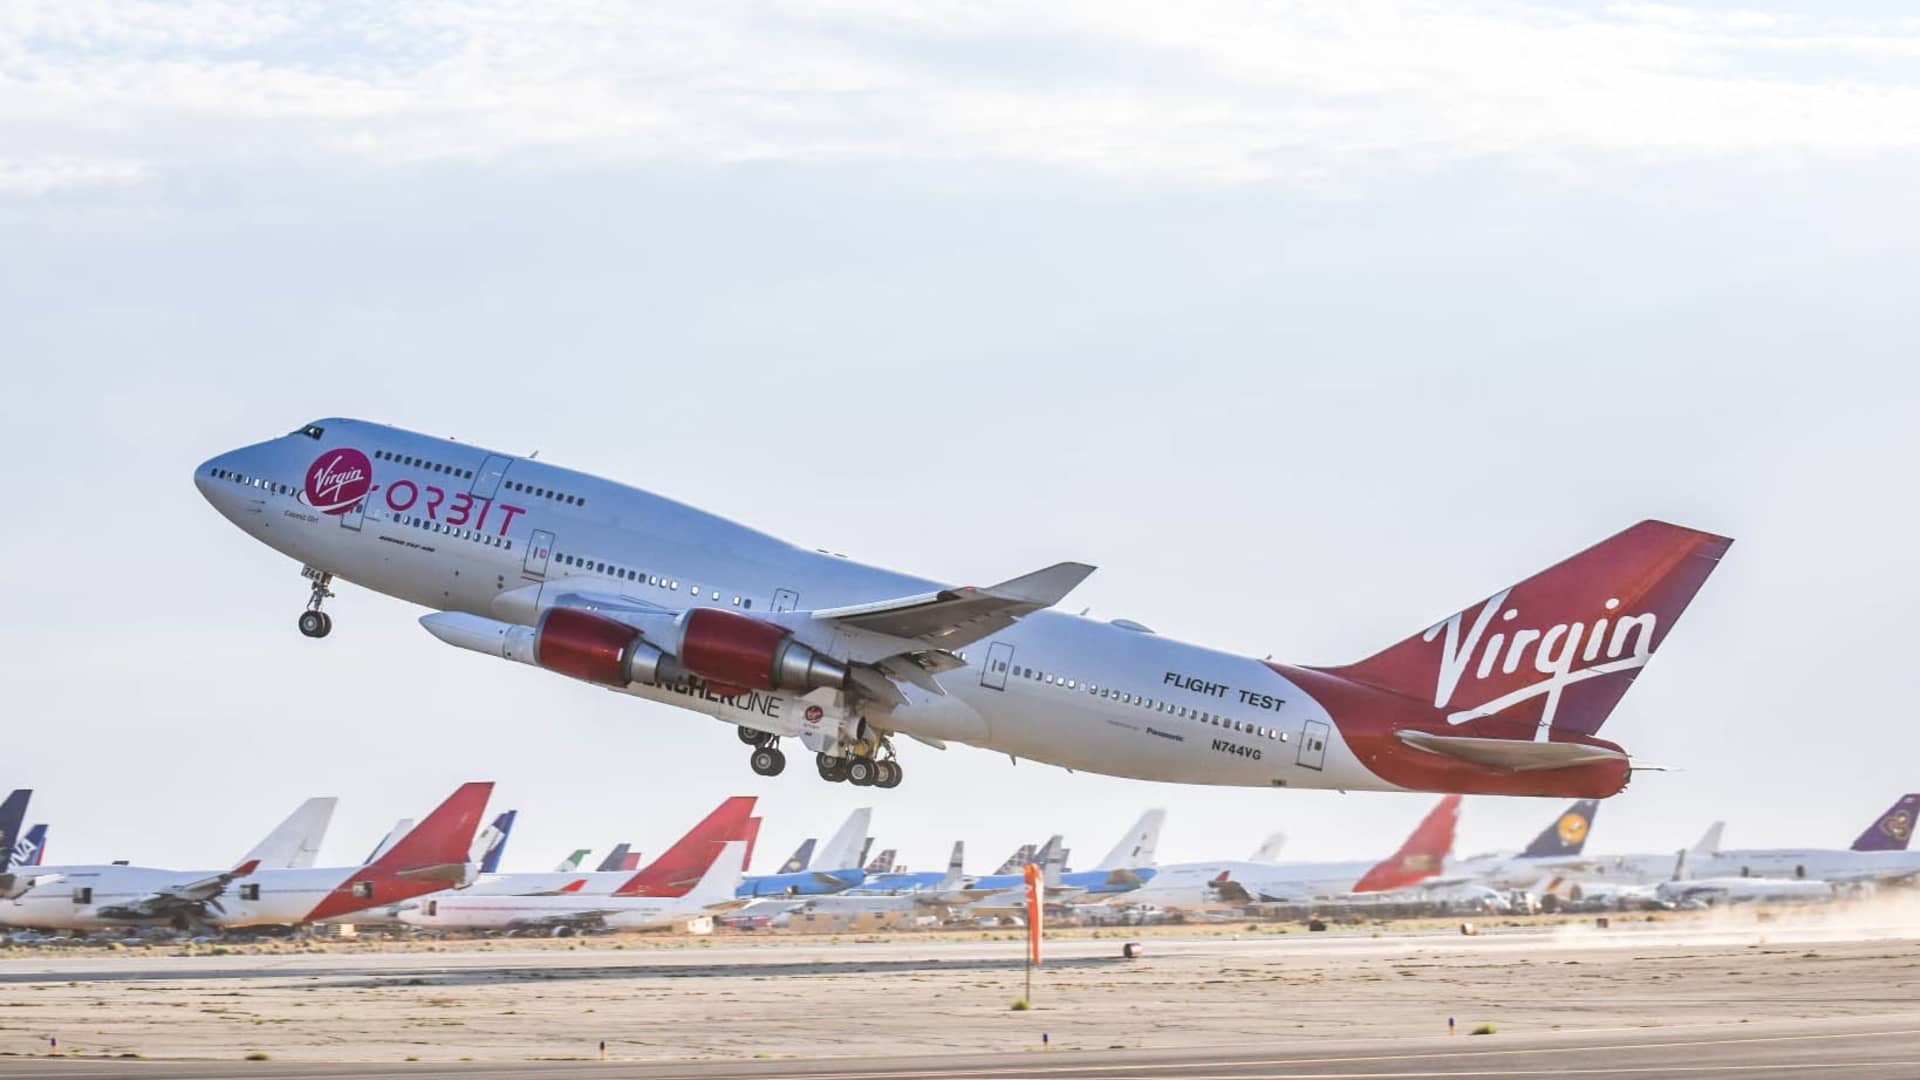 Virgin Orbit COO Blasts Company Leadership for Failures After Bankruptcy Filing